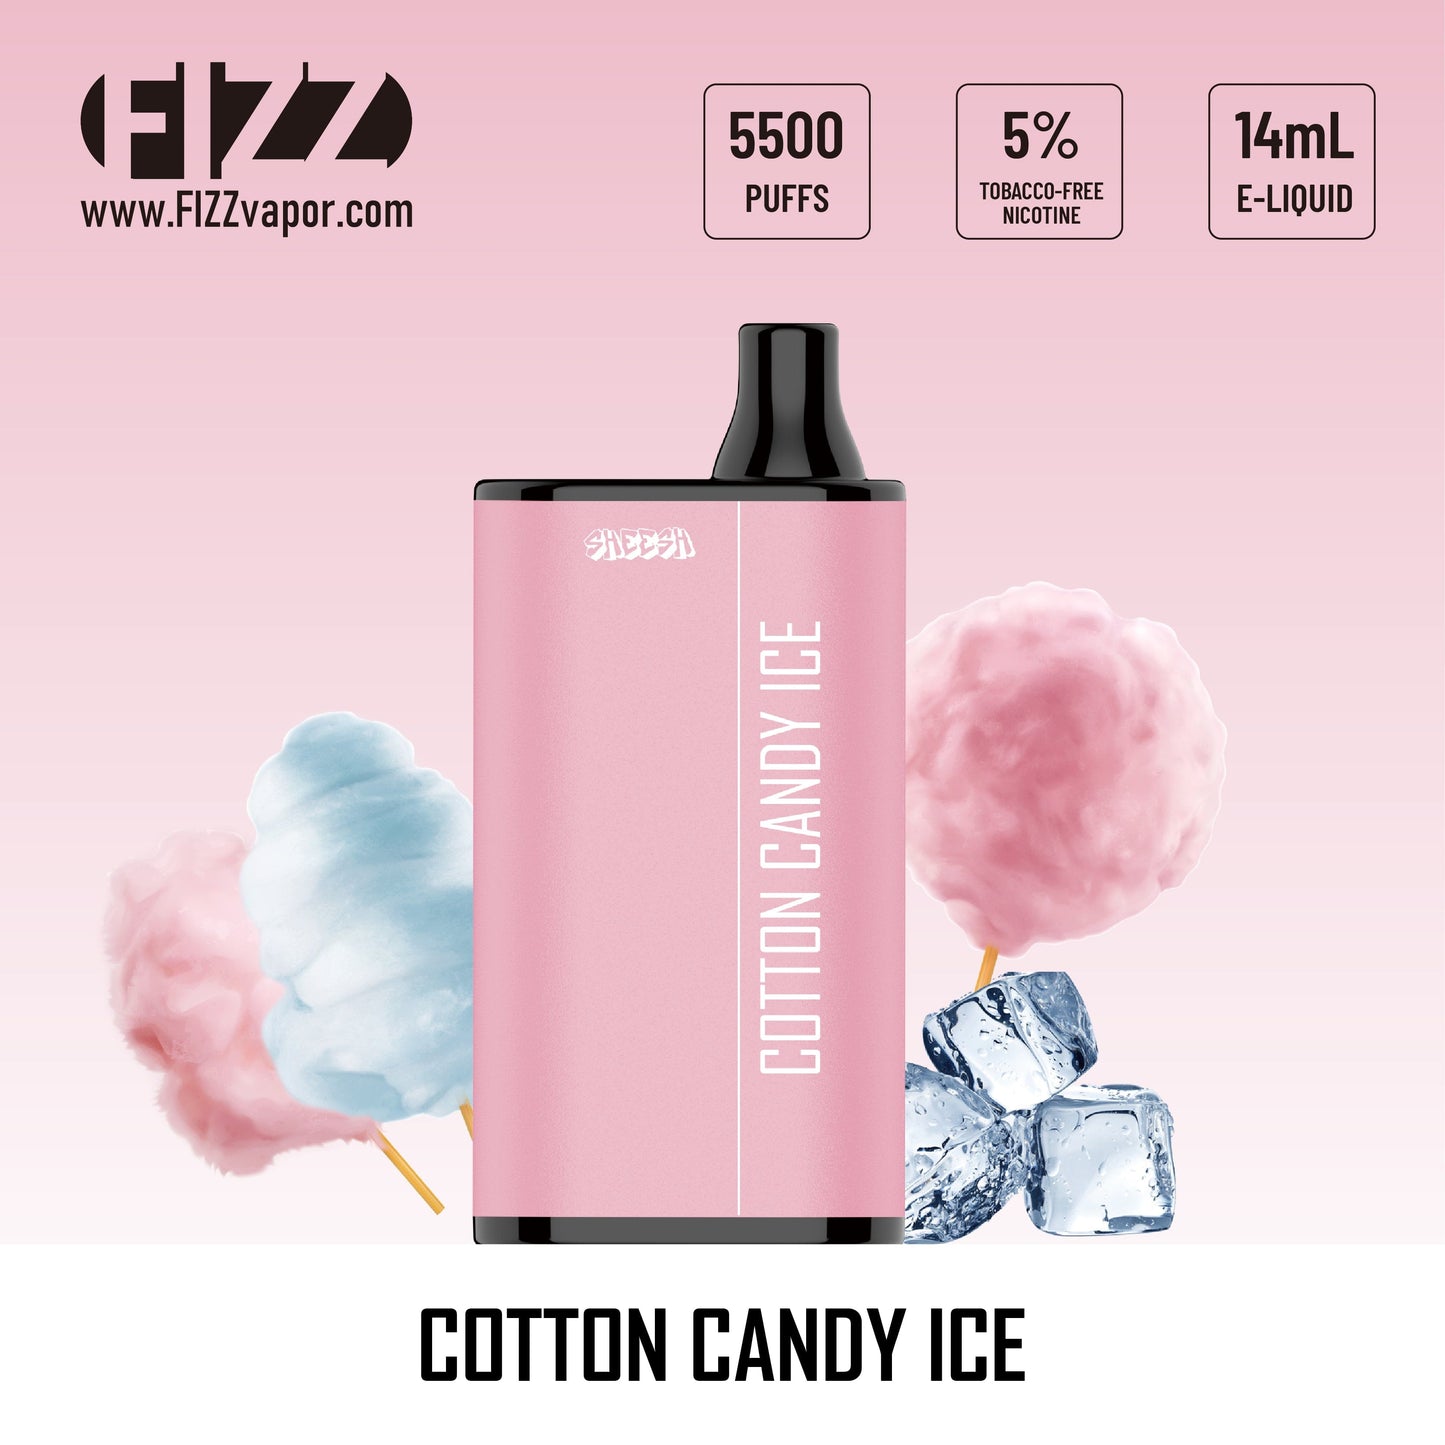 Sheesh - Cotton Candy Ice